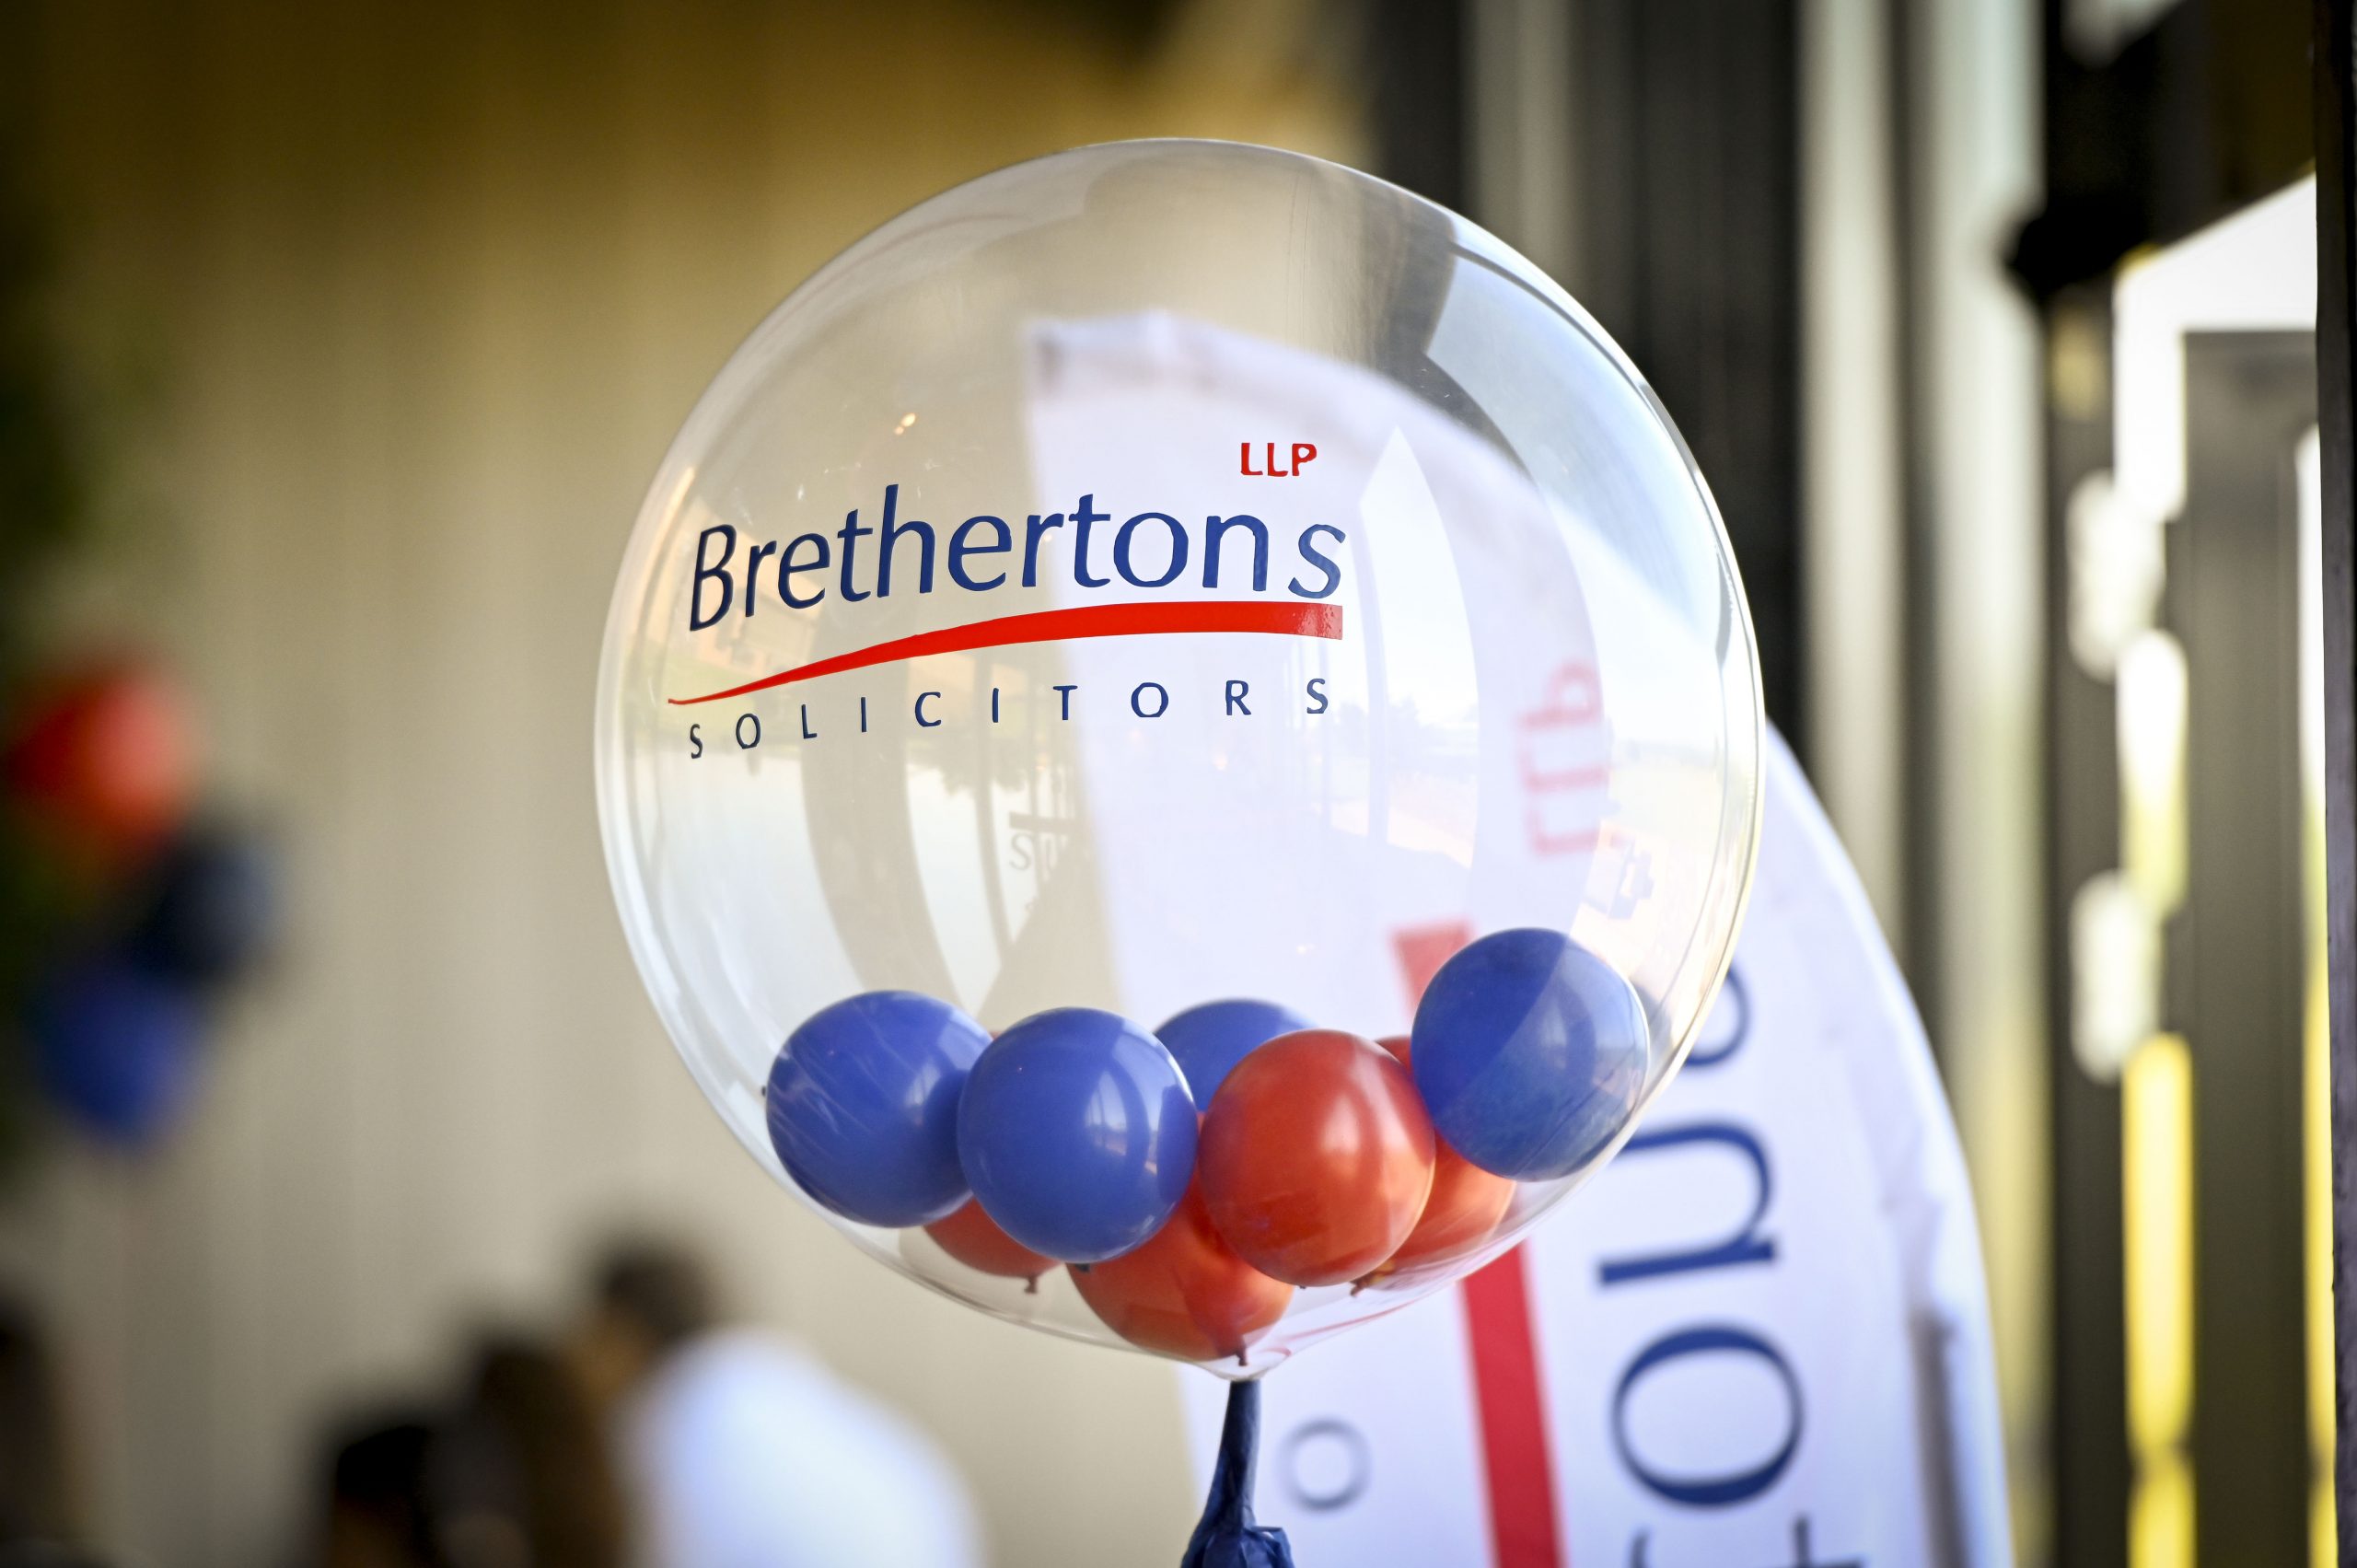 A clear round balloon with the Brethertons LLP Solicitors logo on in blue and red. The balloon is filled with red and blue balls